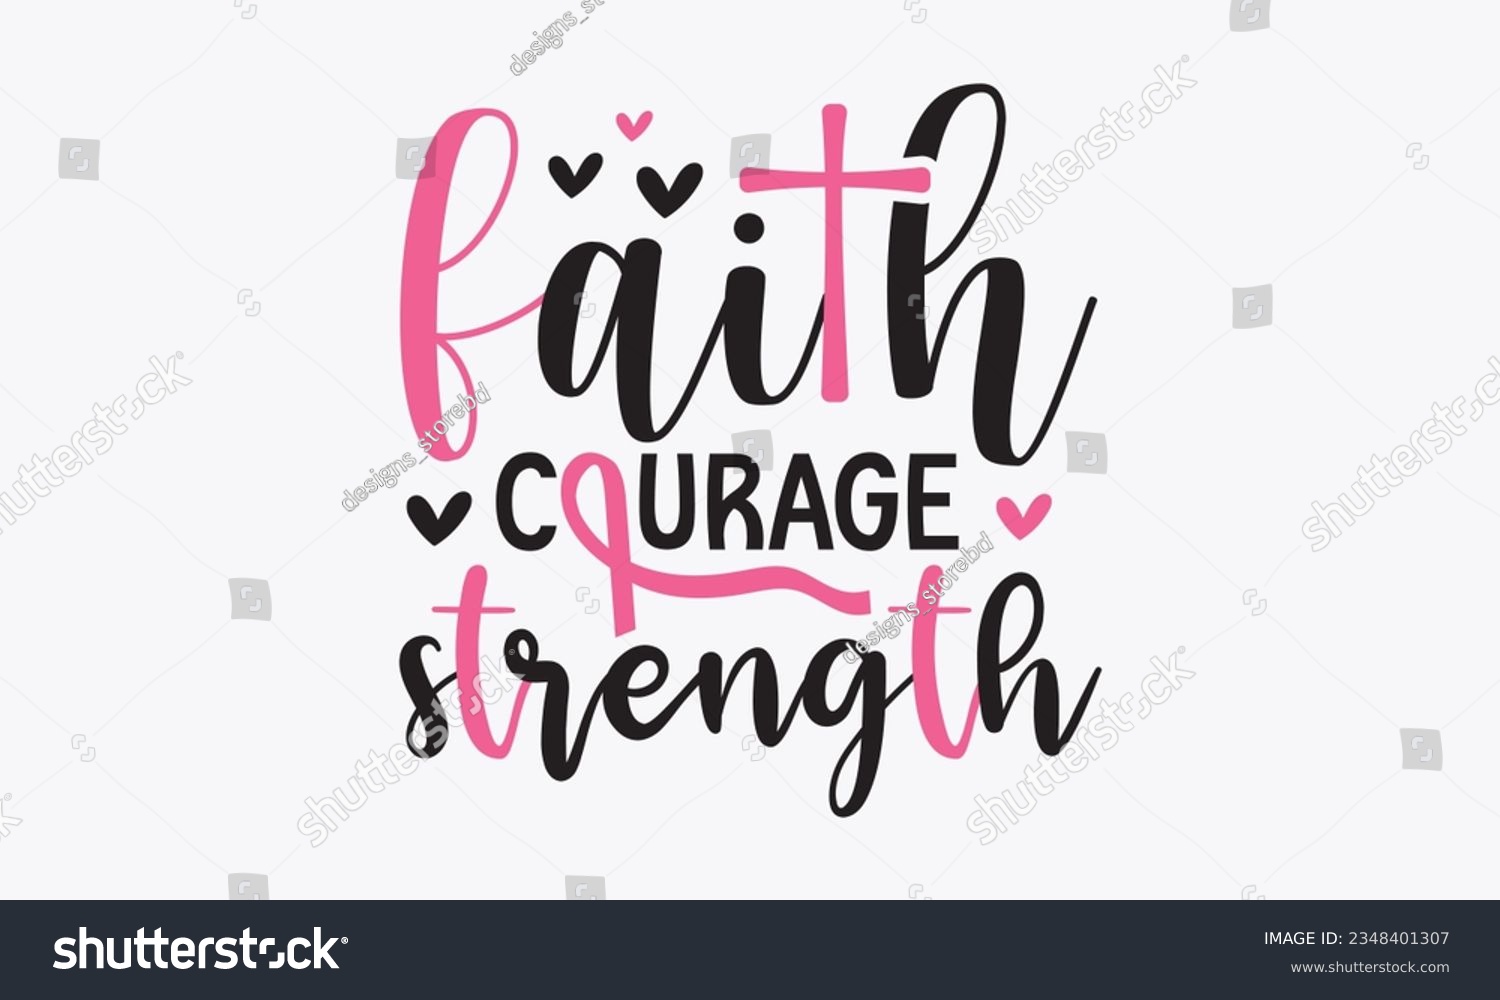 SVG of Faith courage strength svg, Breast Cancer SVG design, Cancer Awareness, Instant Download, Breast Cancer Ribbon svg, cut files, Cricut, Silhouette, Breast Cancer t shirt design Quote bundle svg